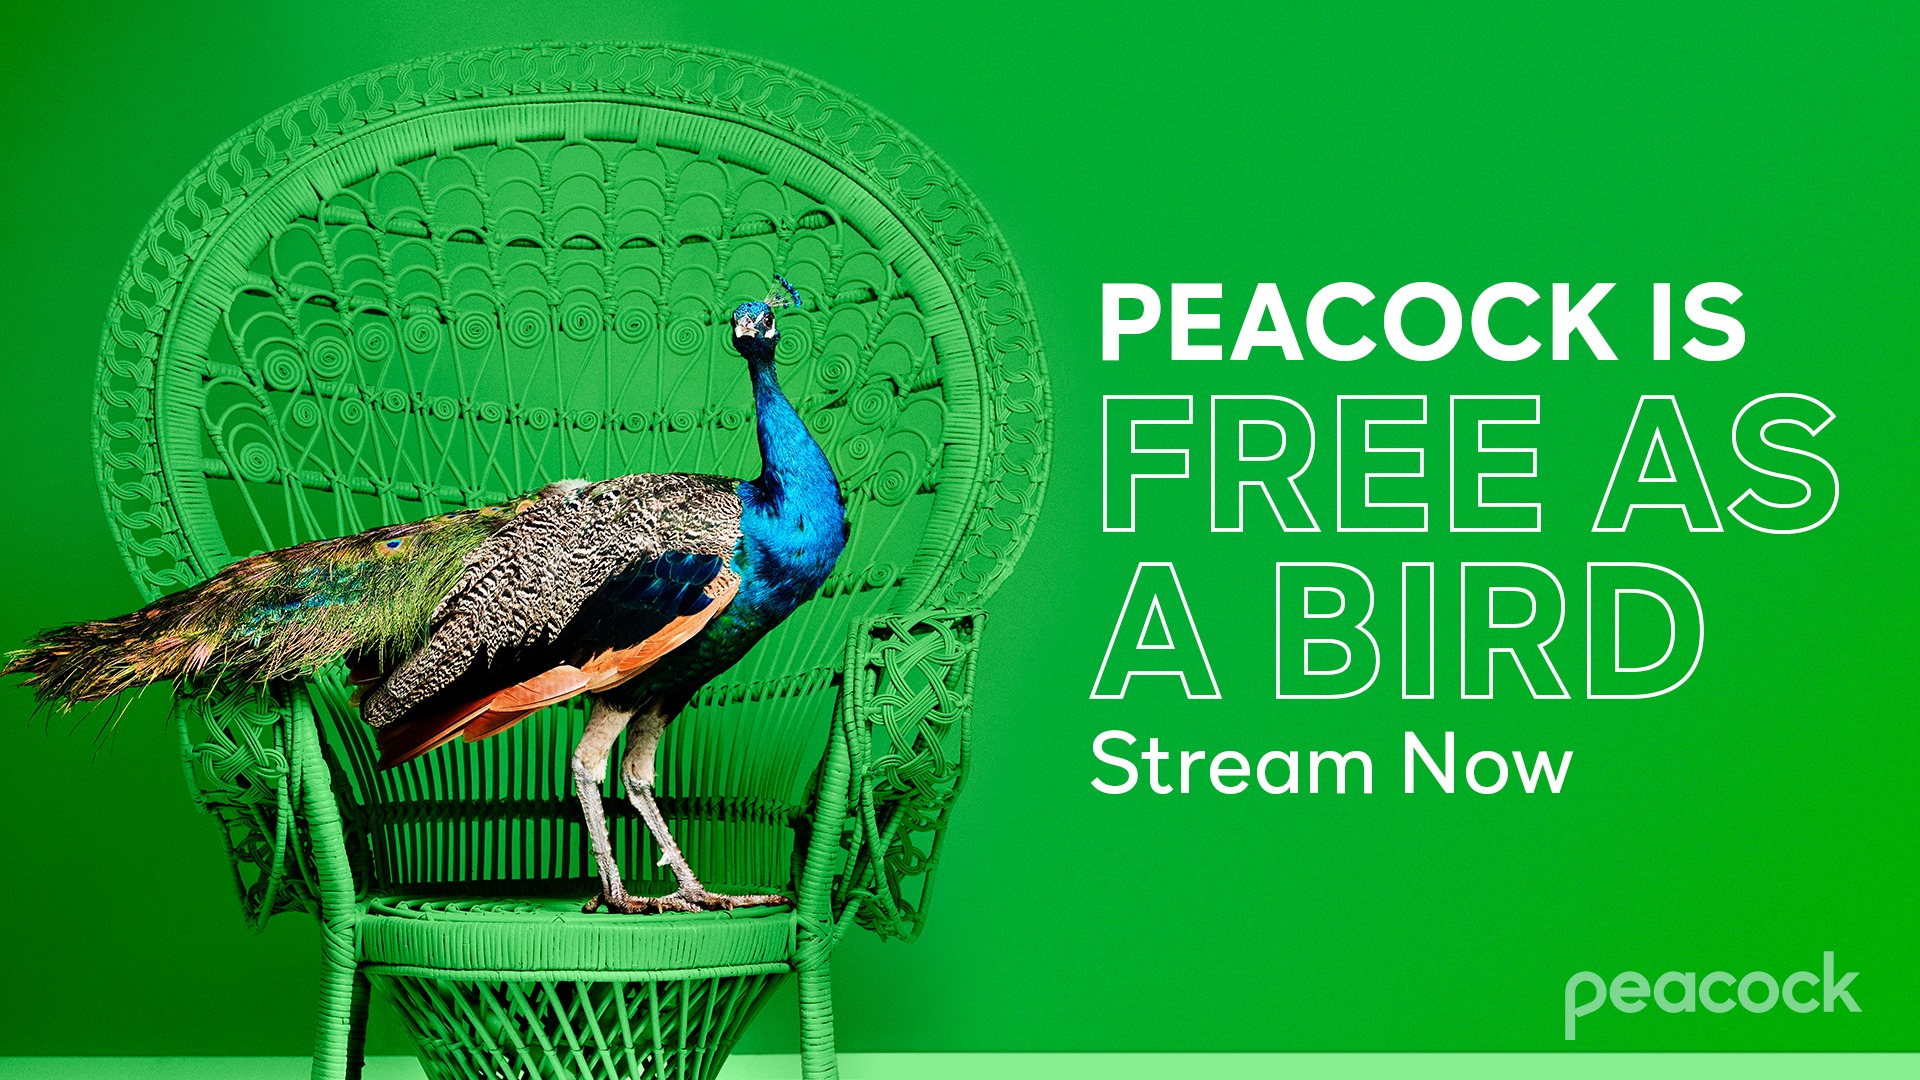 Peacock free tier accounts for 90% of all viewers, claims research -  Digital TV Europe